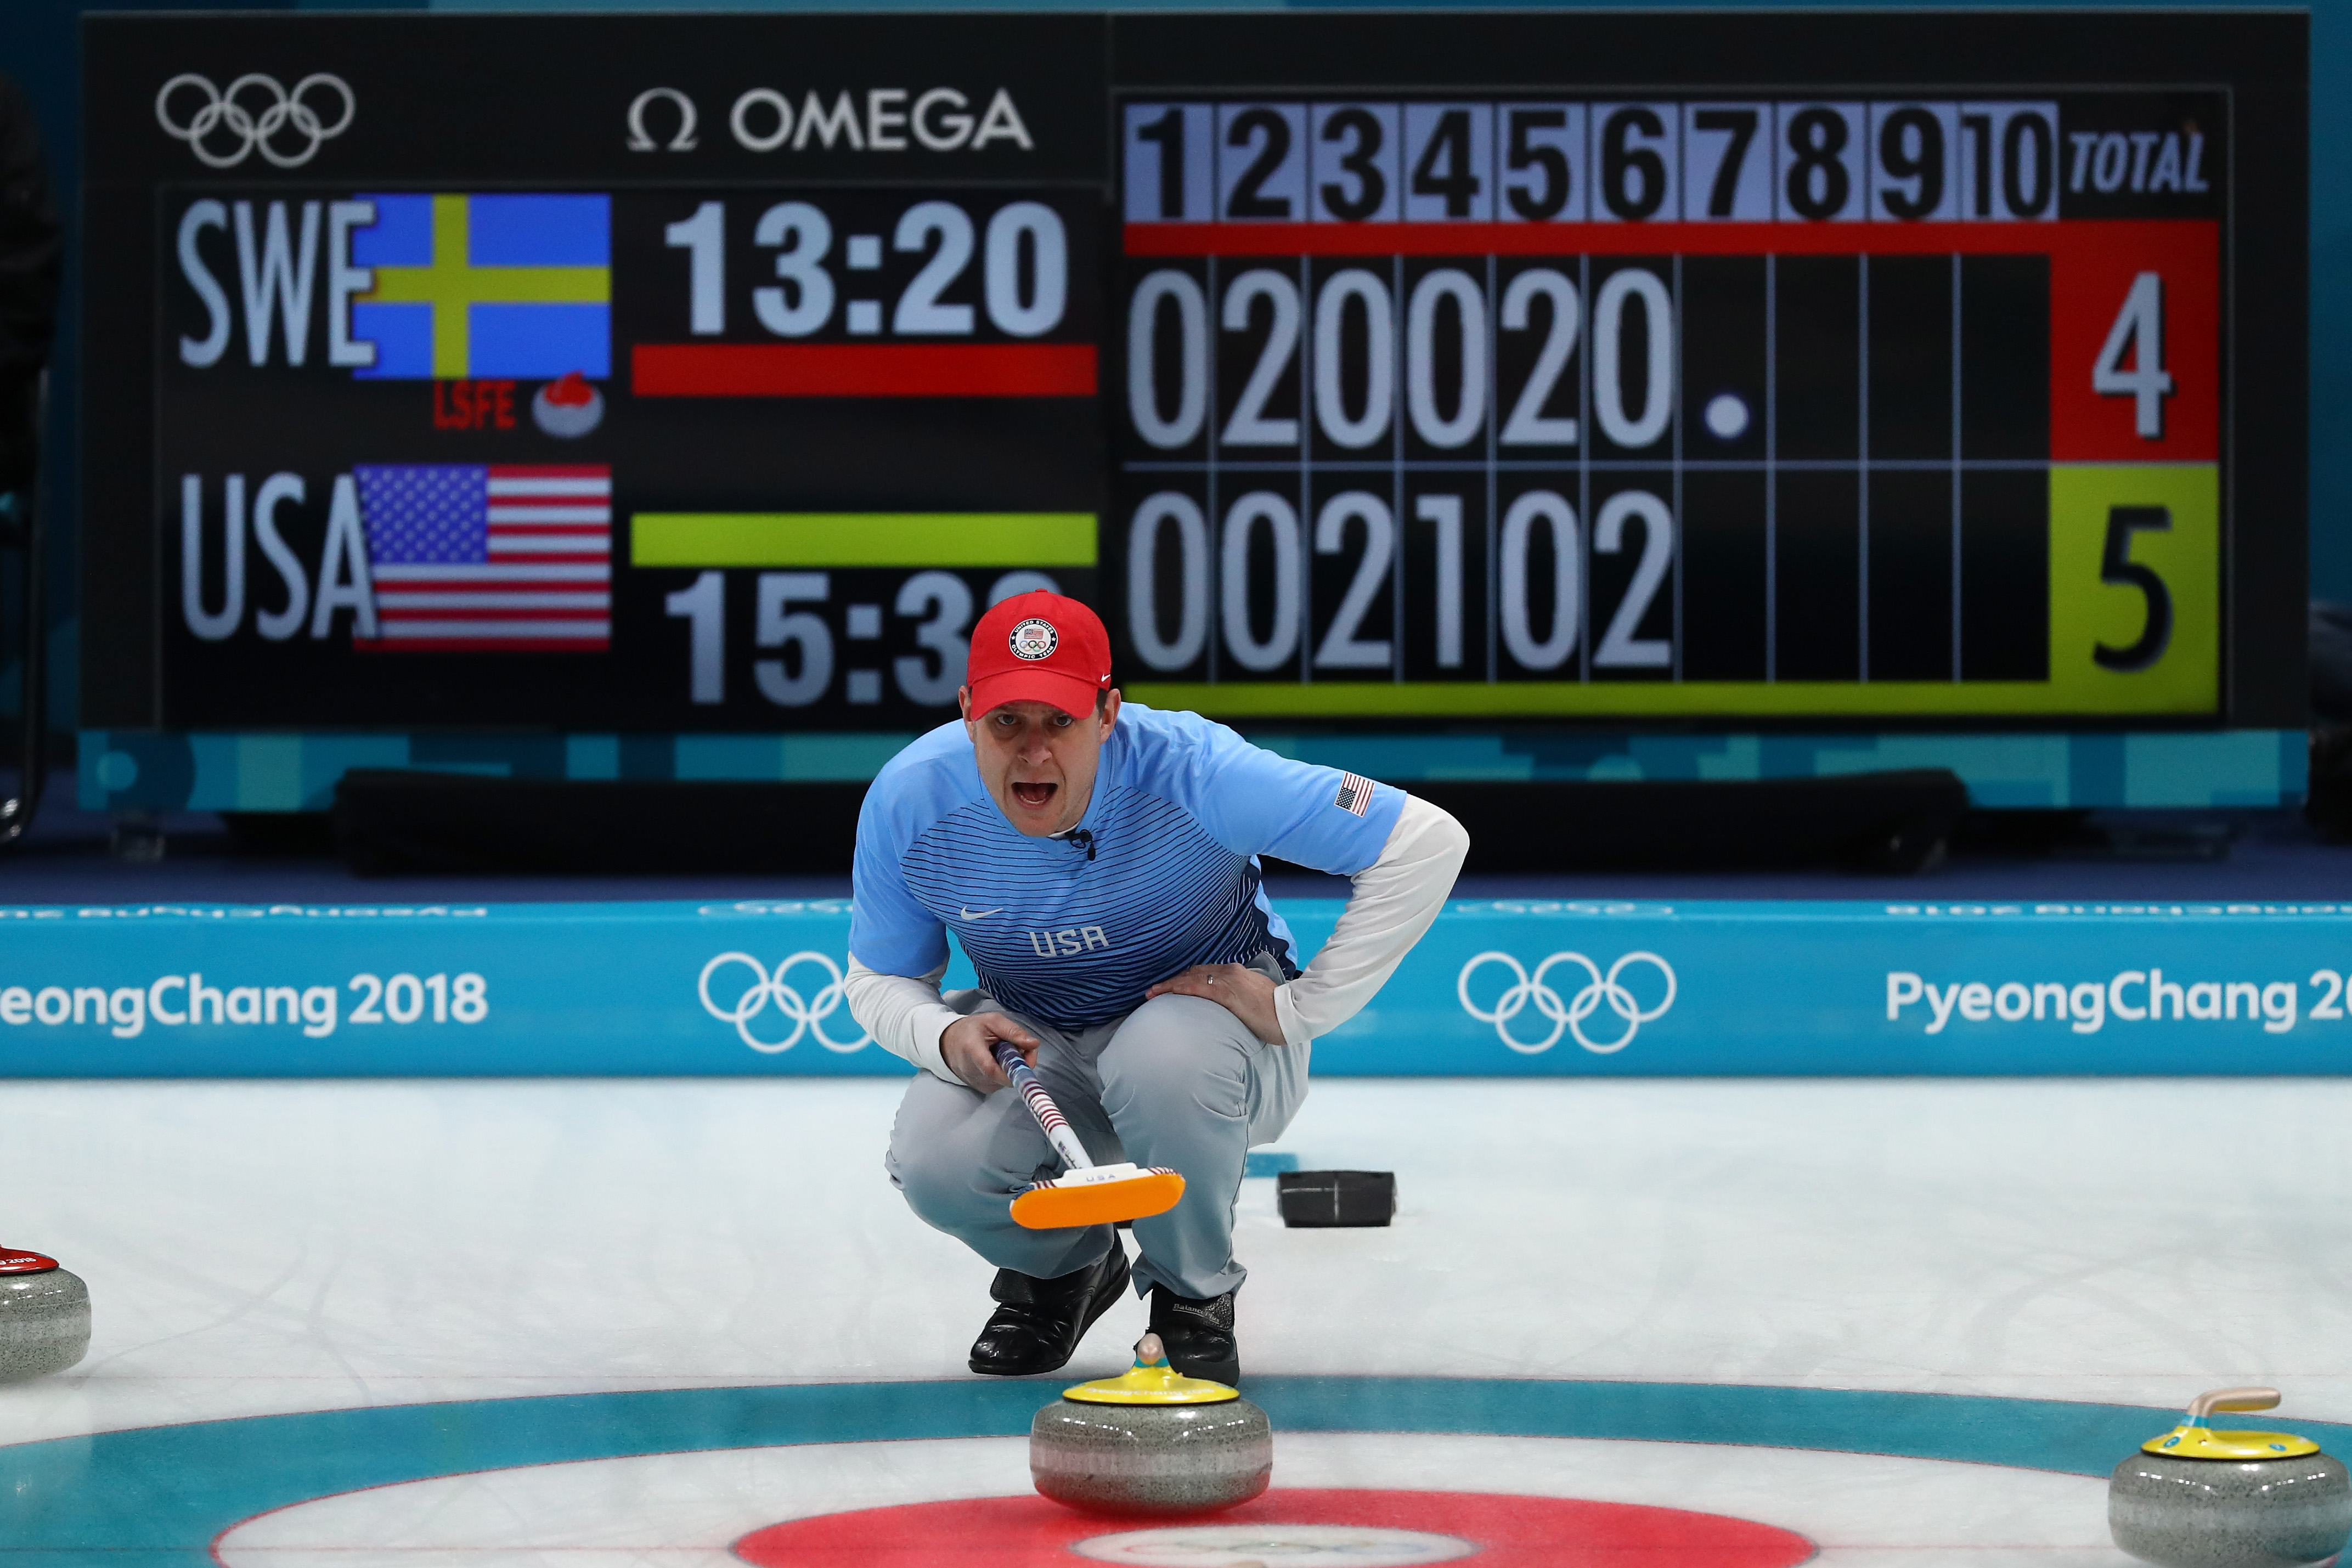 John Shuster of the United States lines up a shot against Sweden during the Curling Men's Gold Medal game on day fifteen of the PyeongChang 2018 Winter Olympic Games at Gangneung Curling Centre on February 24, 2018 in Gangneung, South Korea (Dean Mouhtaropoulos - Getty Images)